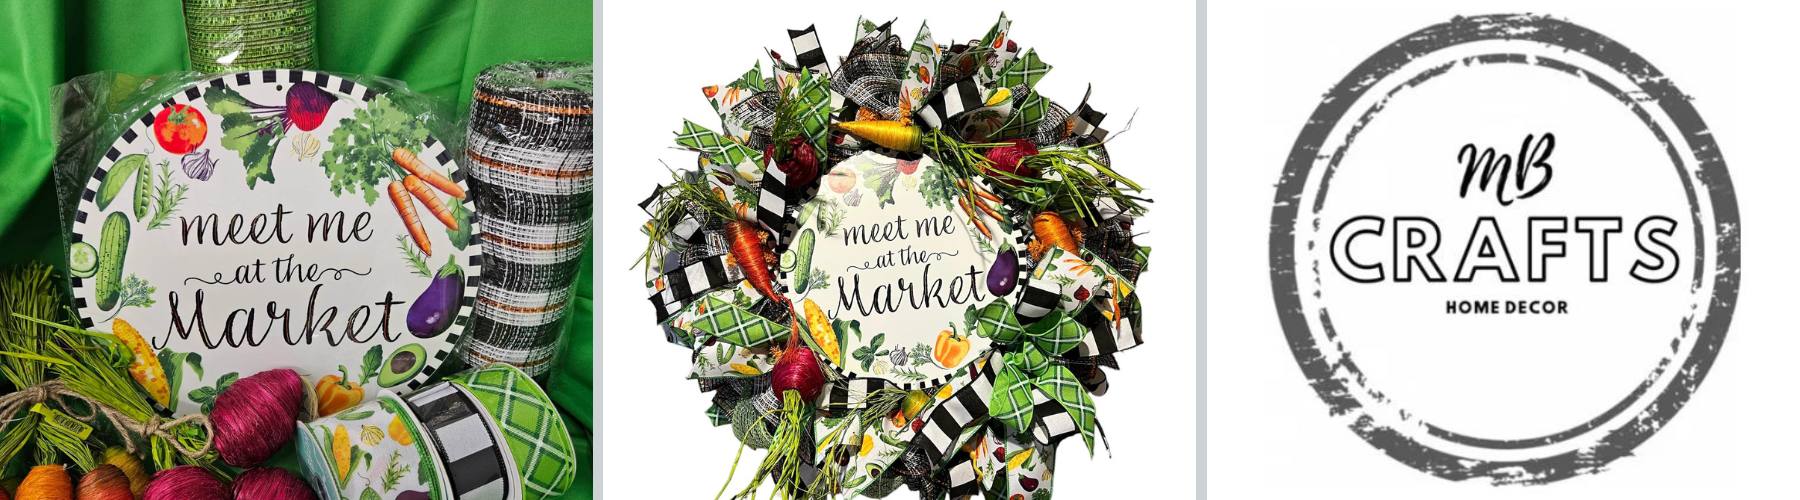 everyday wreath with a meet me at the market sign and veggies